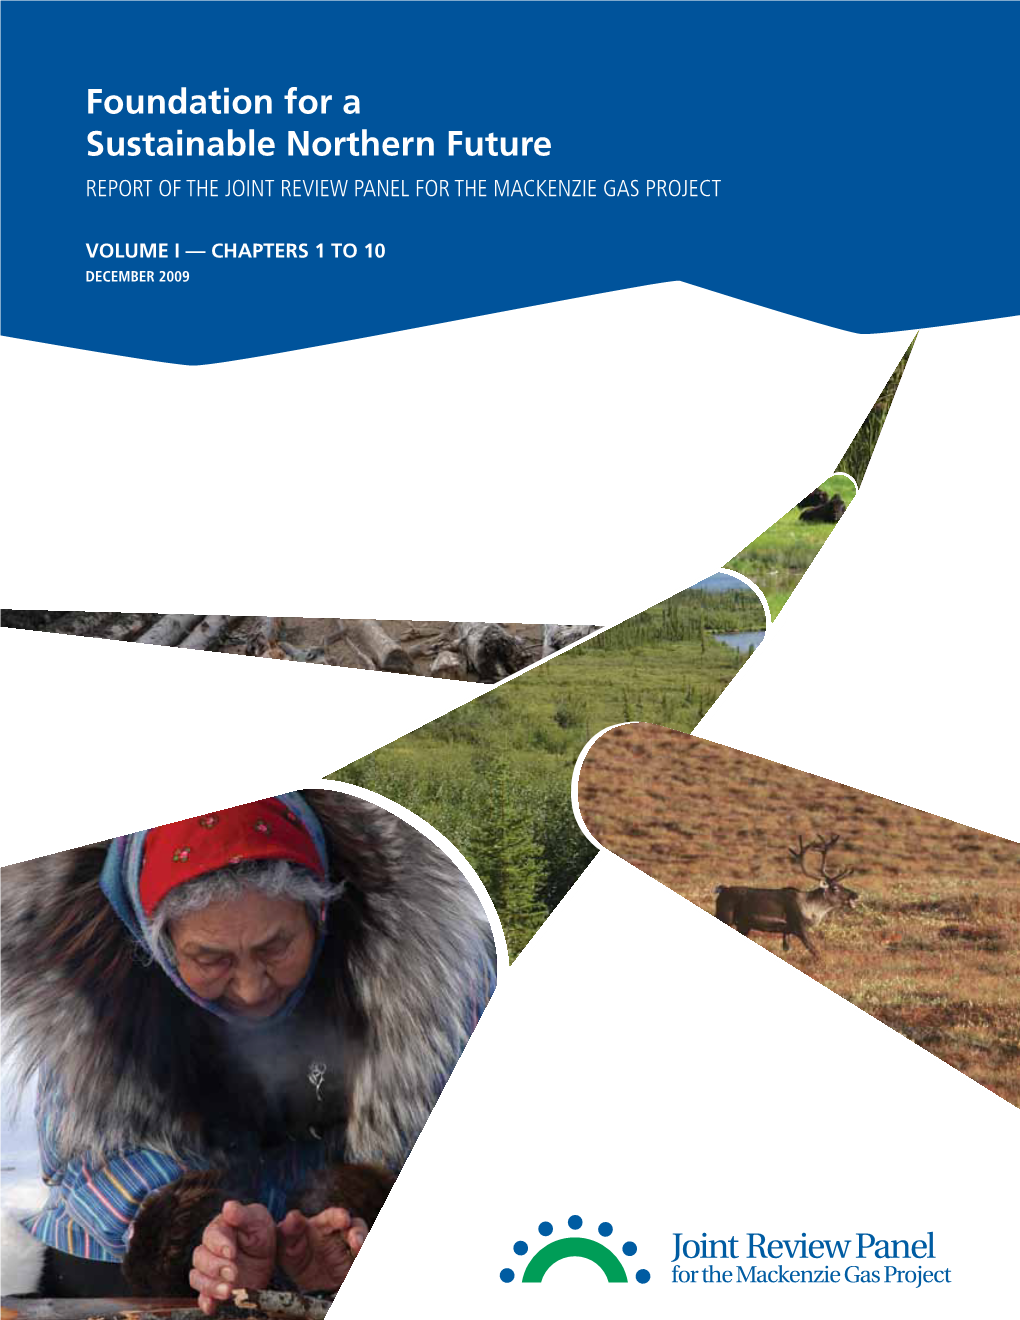 Foundation for a Sustainable Northern Future Report of the Joint Review Panel for the Mackenzie Gas Project